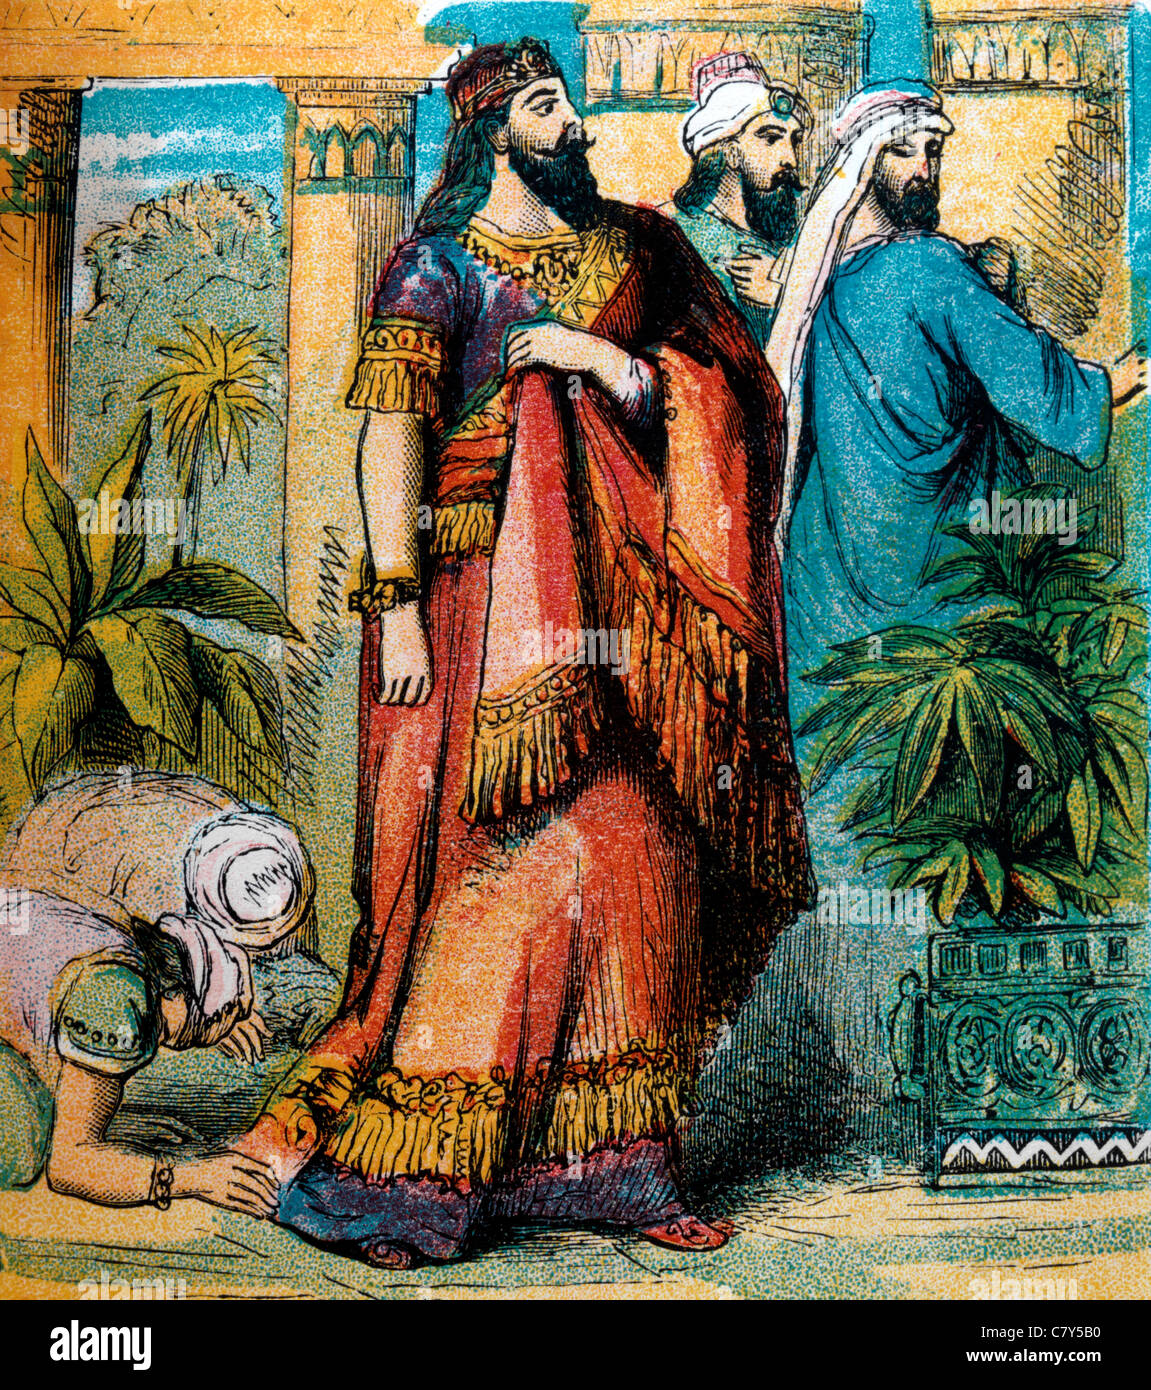 Bible Stories - Illustration Of King Ahasuerus Arranges A Feast In The Court Of The Garden in Shushan Palace Stock Photo